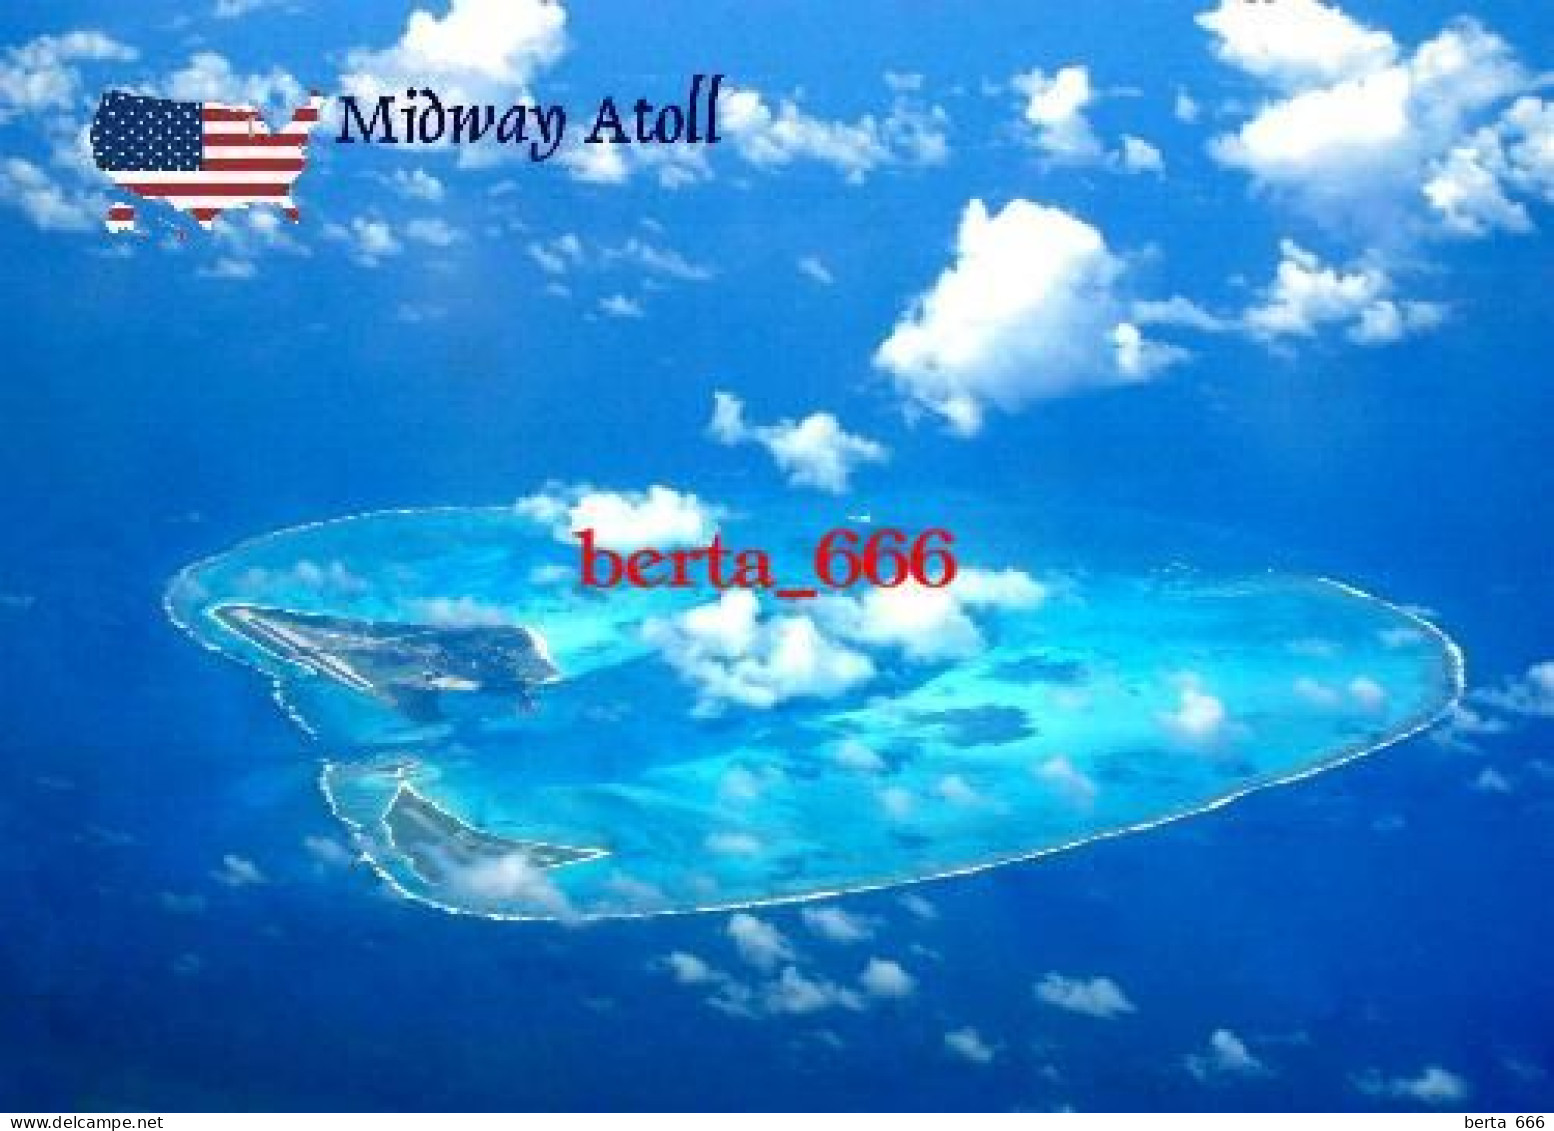 United States Midway Atoll Aerial View New Postcard - Islas Midway